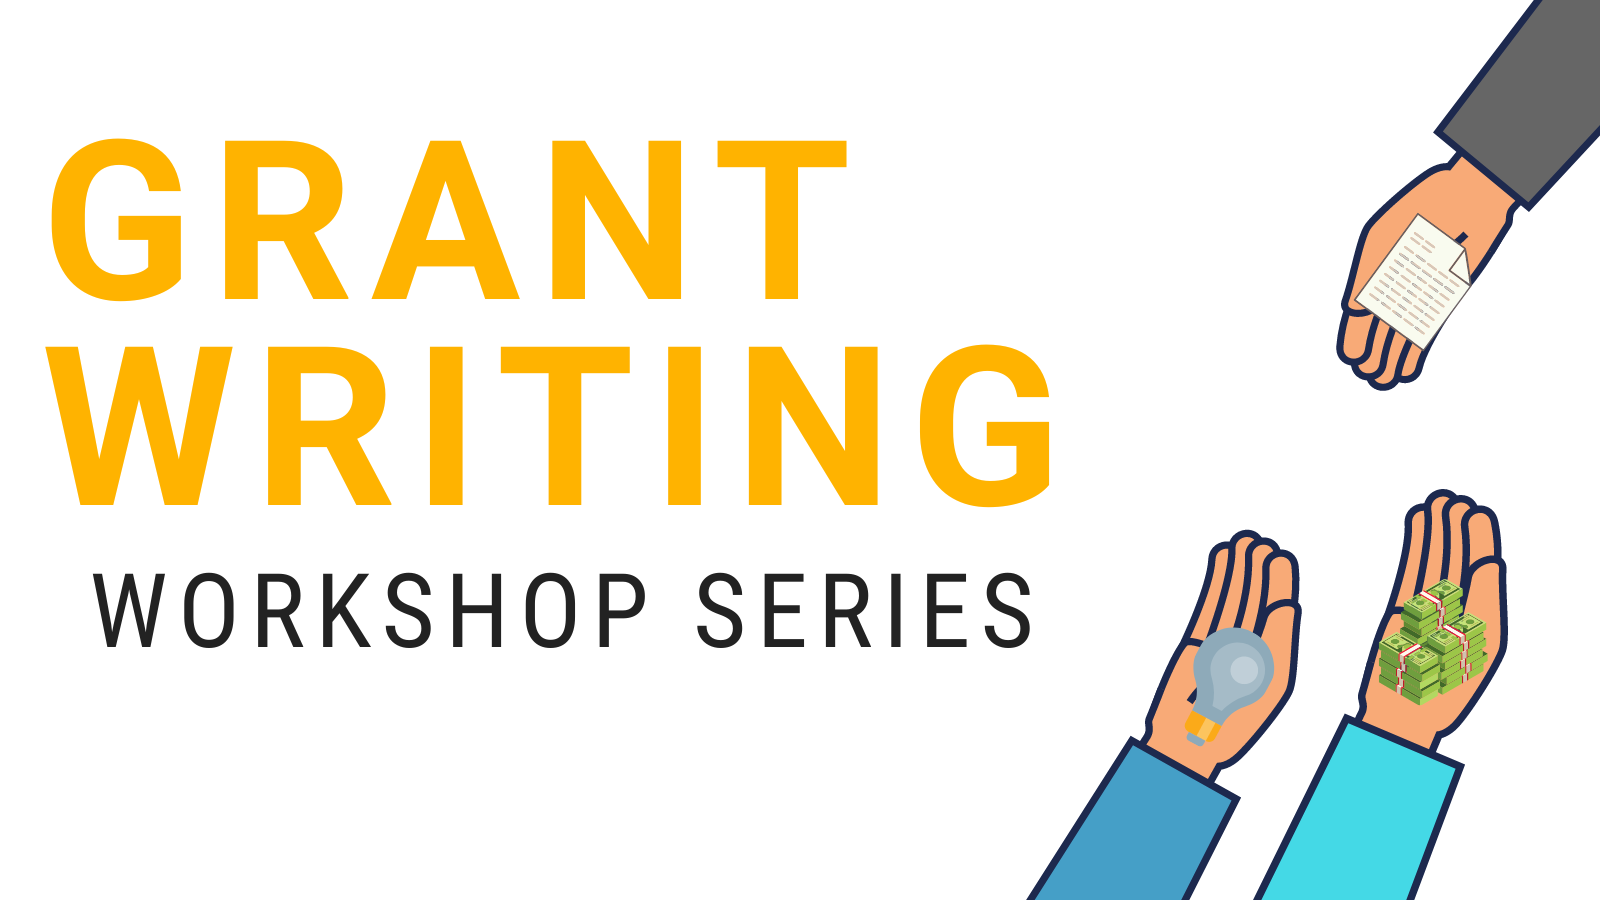 TEXT “Grant Writing Workshop Series” next to three hands; one holding a document, one holding a lightbulb and one holding cash.